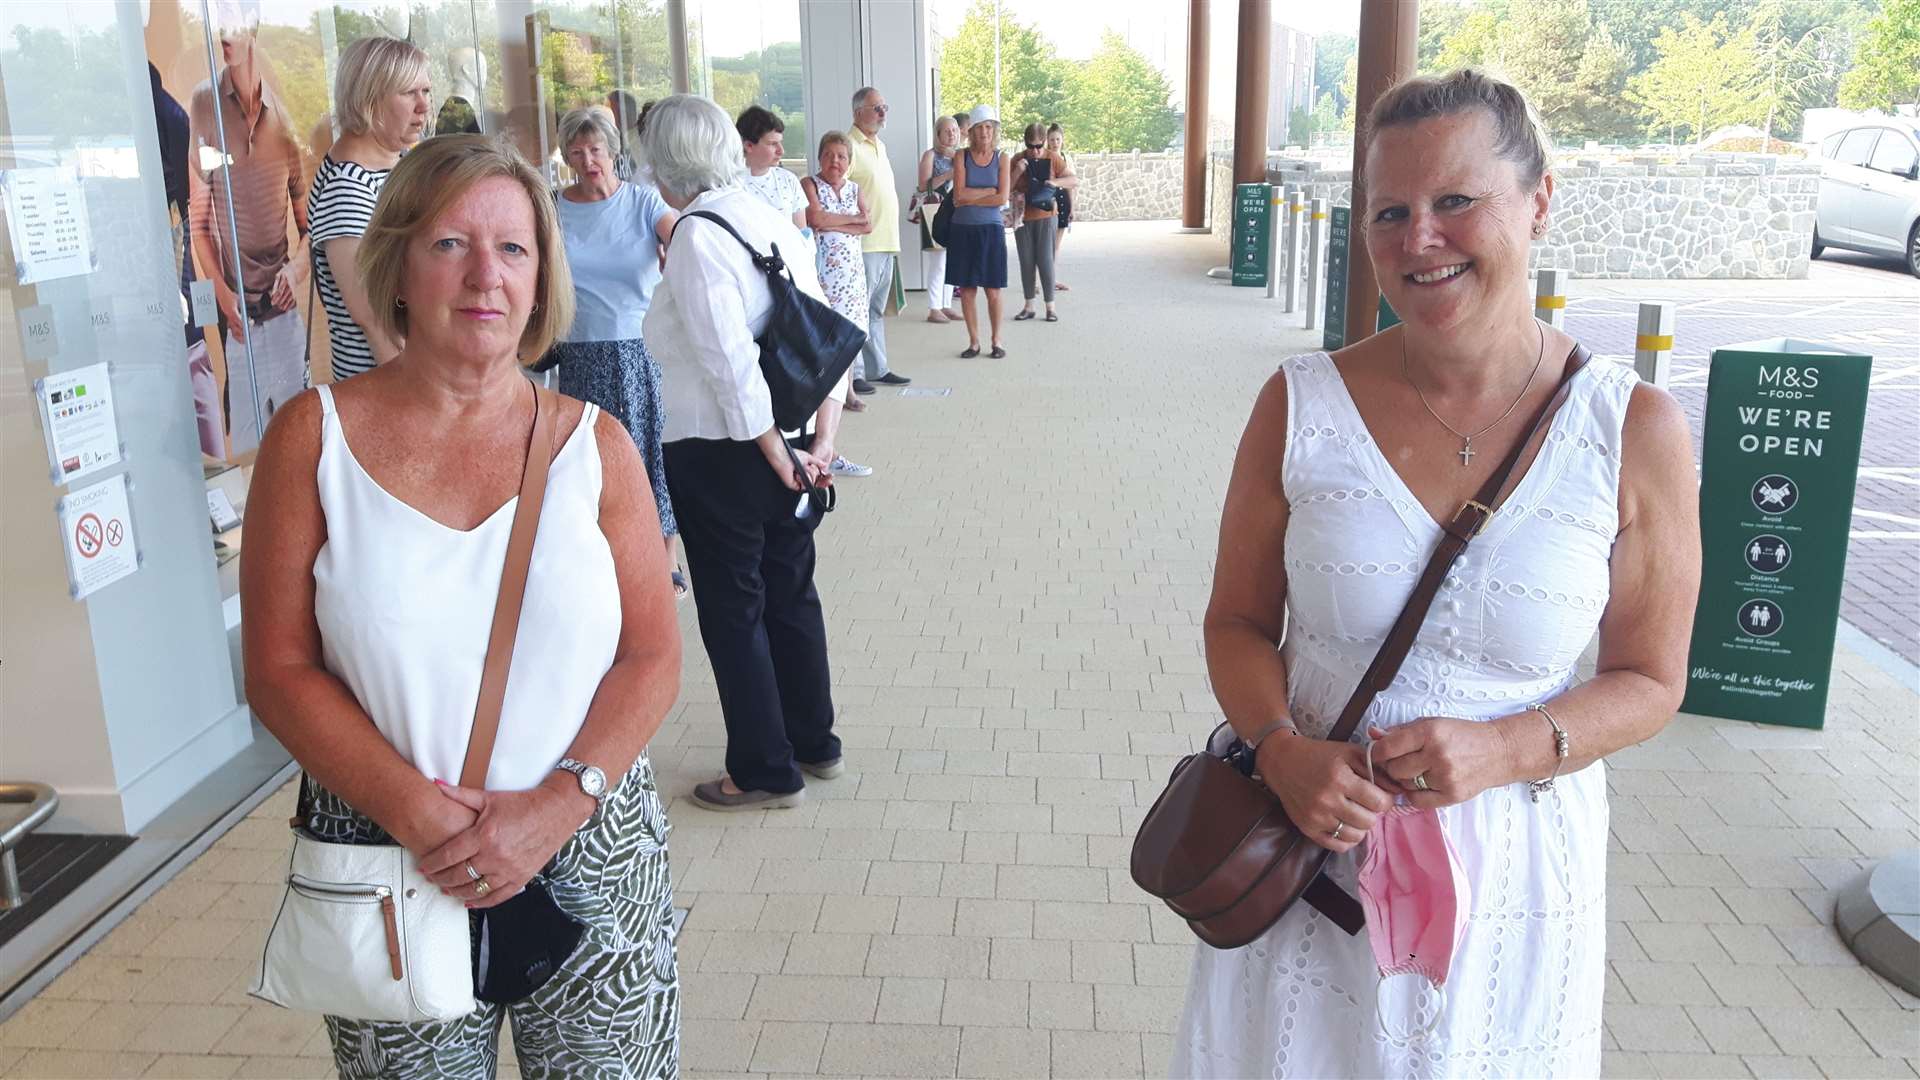 First in line for the Home and Clothing department: Irene Scannell left and Stephanie Clarke